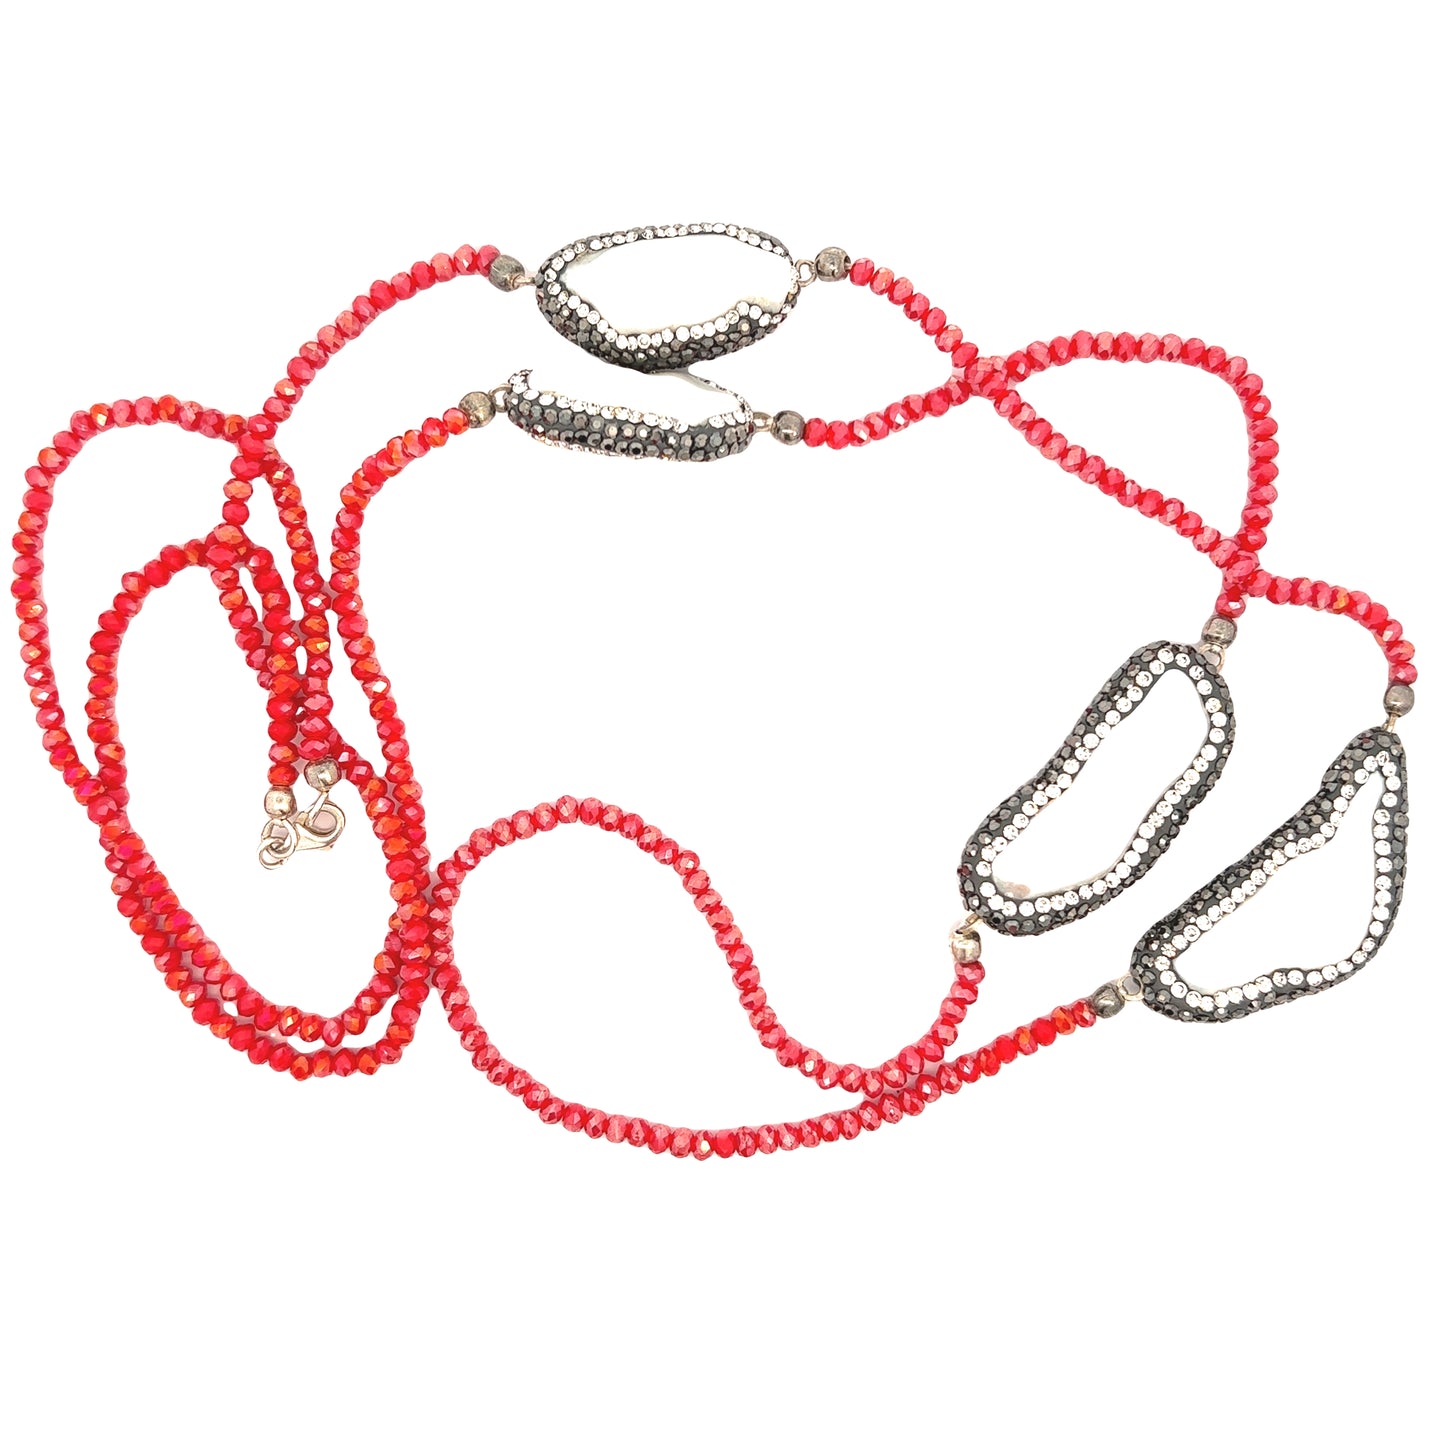 Red Pearl Crystal Elegance Long Necklace - Born To Glam